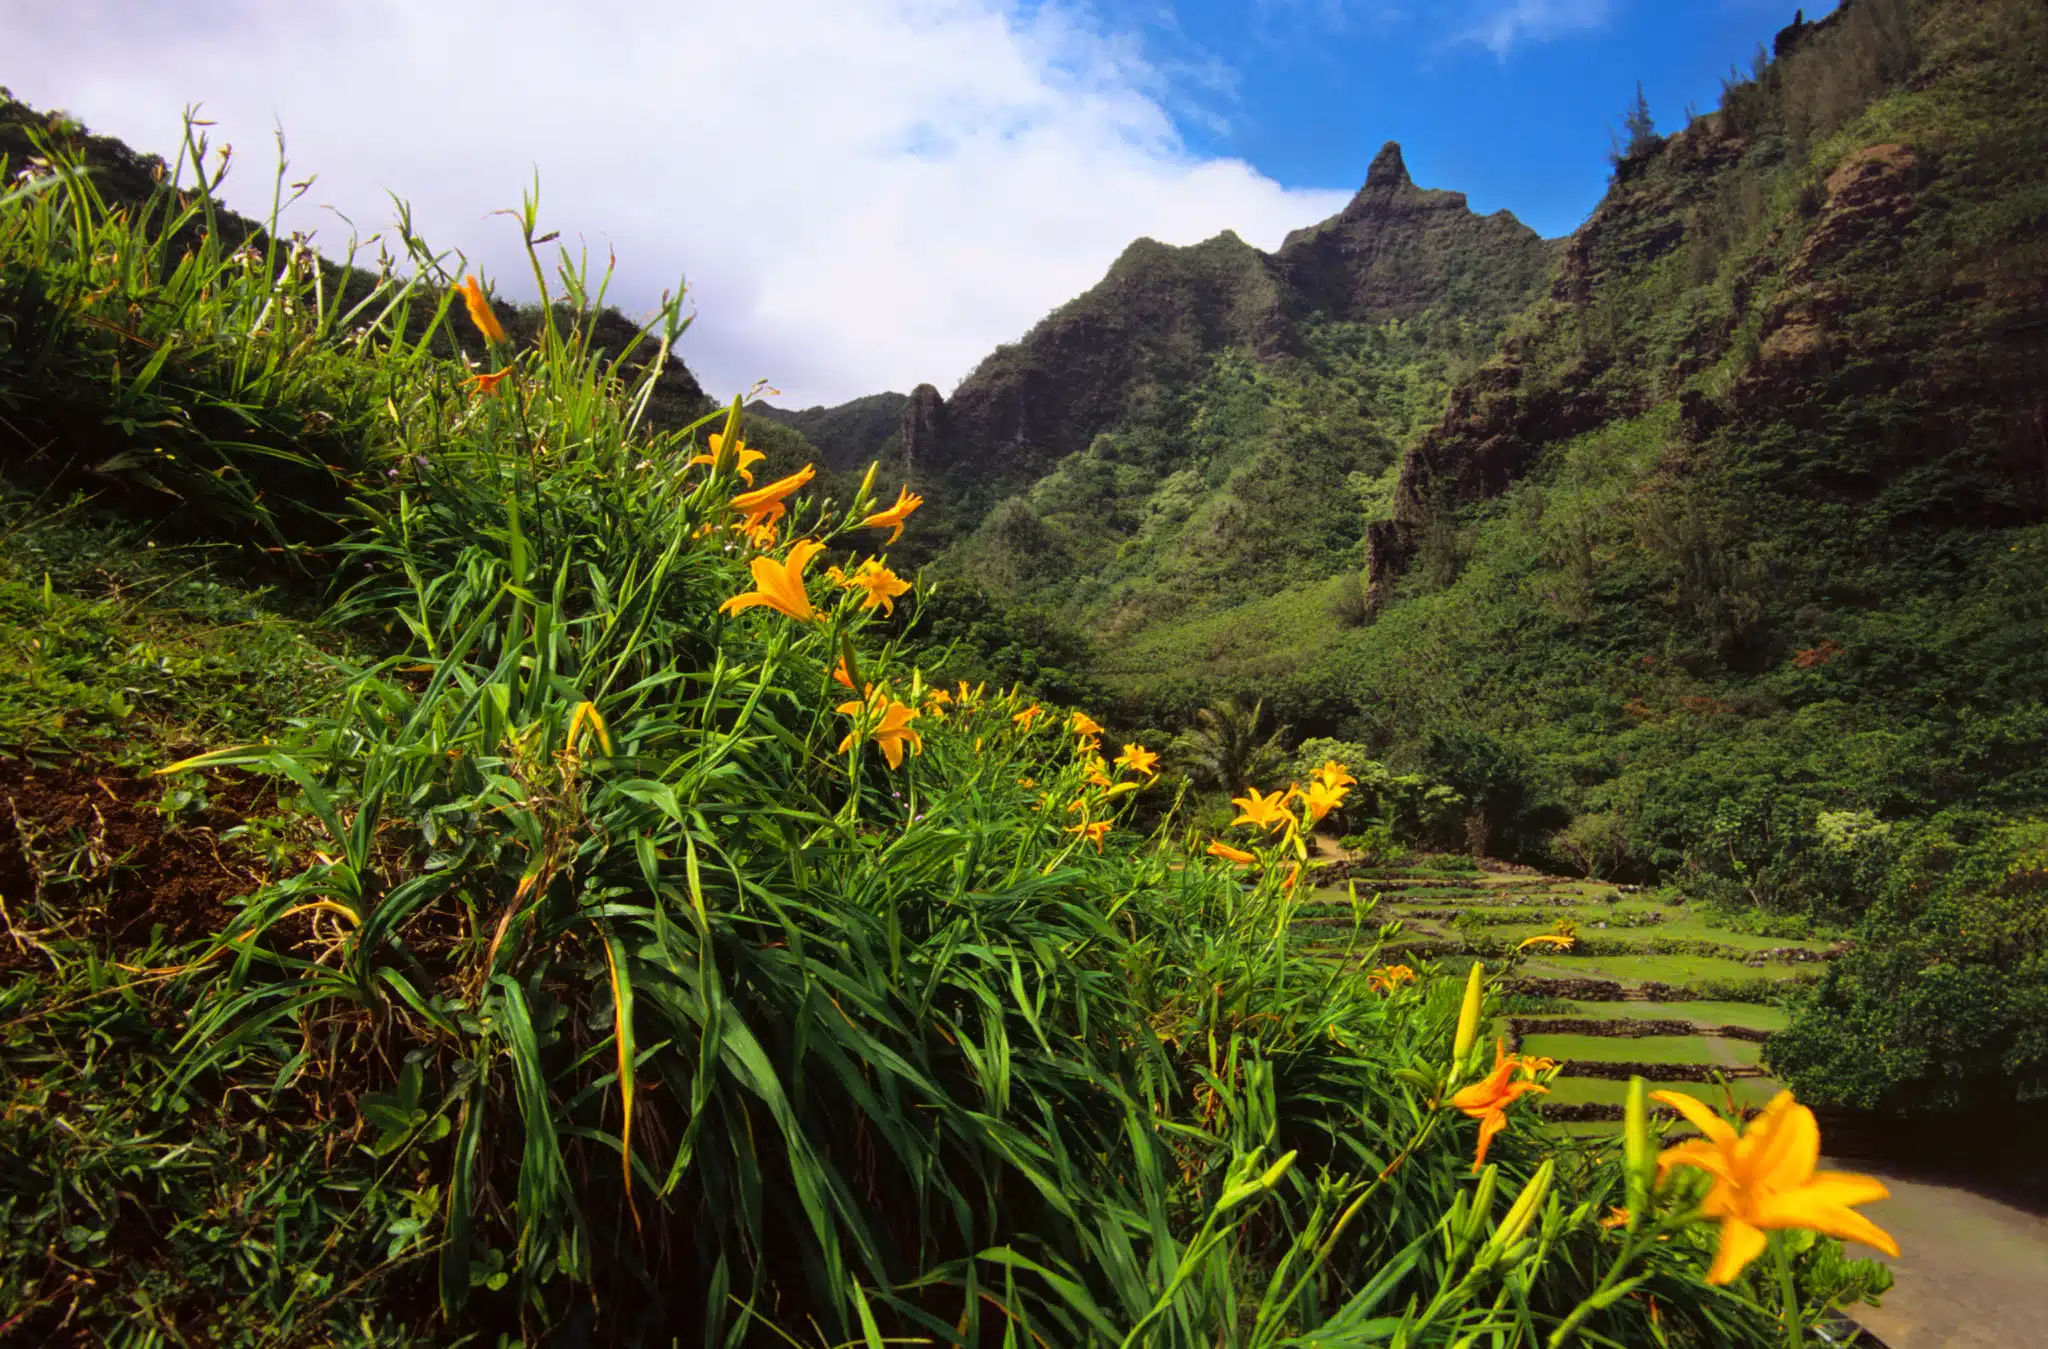 Ha'ena State Park is a State Park located in the city of Hanalei on Kauai, Hawaii